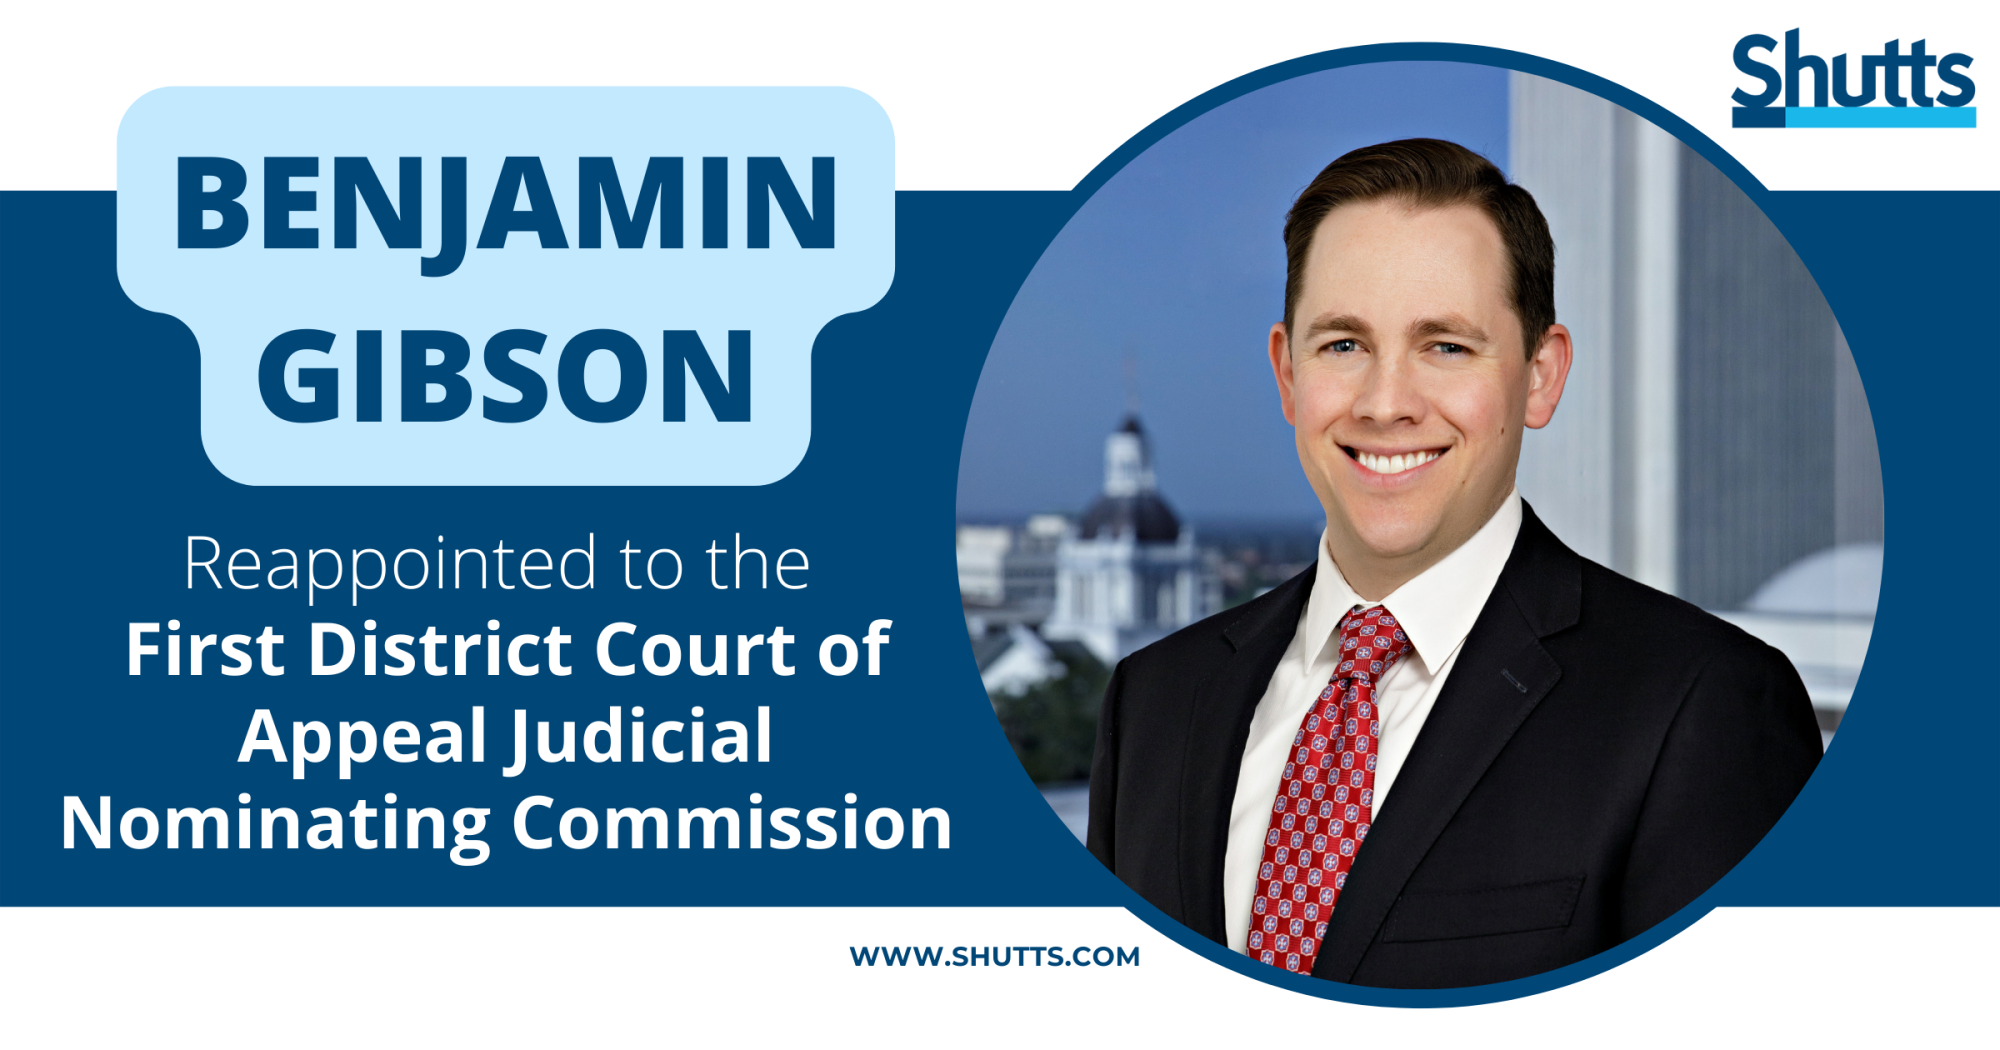 Benjamin Gibson Reappointed to the First District Court of Appeal Judicial Nominating Commission